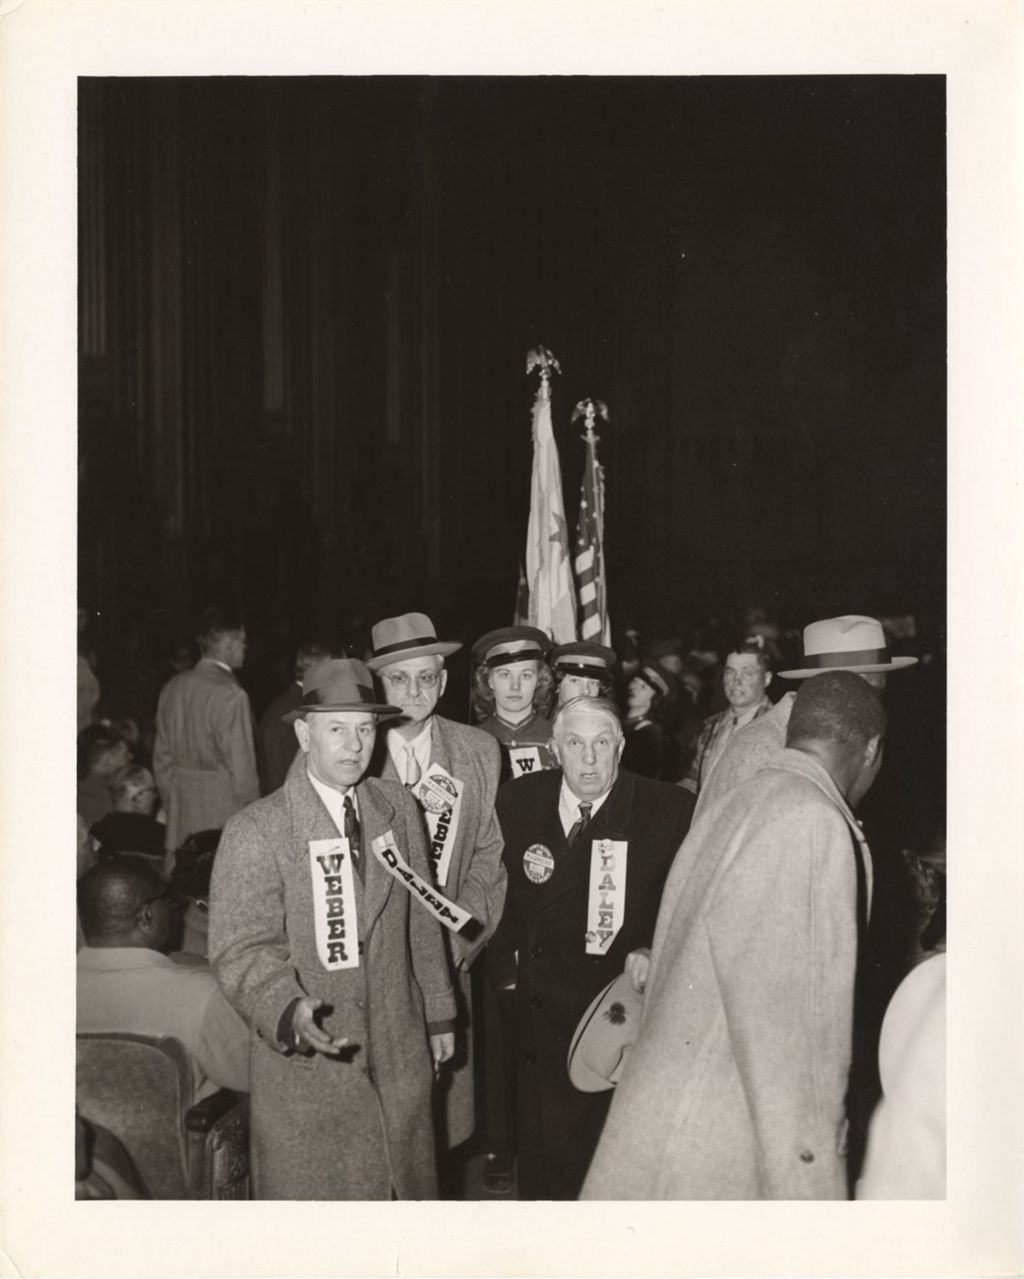 Daley and Weber supporters at an auditorium event